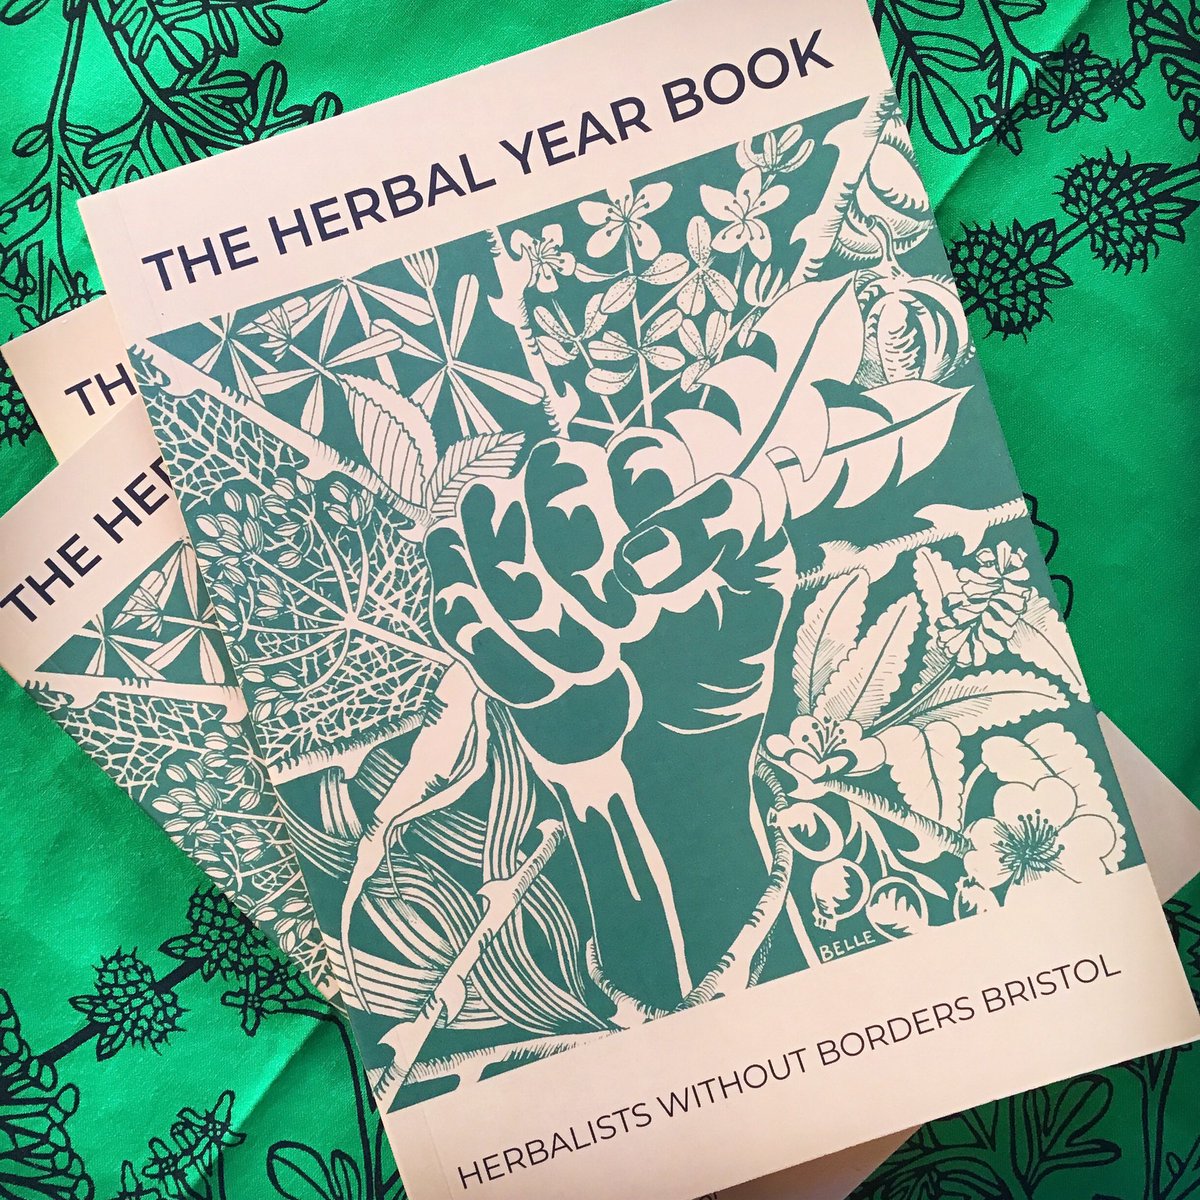 “The Herbal Year Book will deepen your connection to the medicinal herbs & teach you about medicines that you can make with them. A beautiful collection of illustrations, recipes & herbal wisdom with a handy monthly harvest guide.” burningbooks.com/products/the-h…